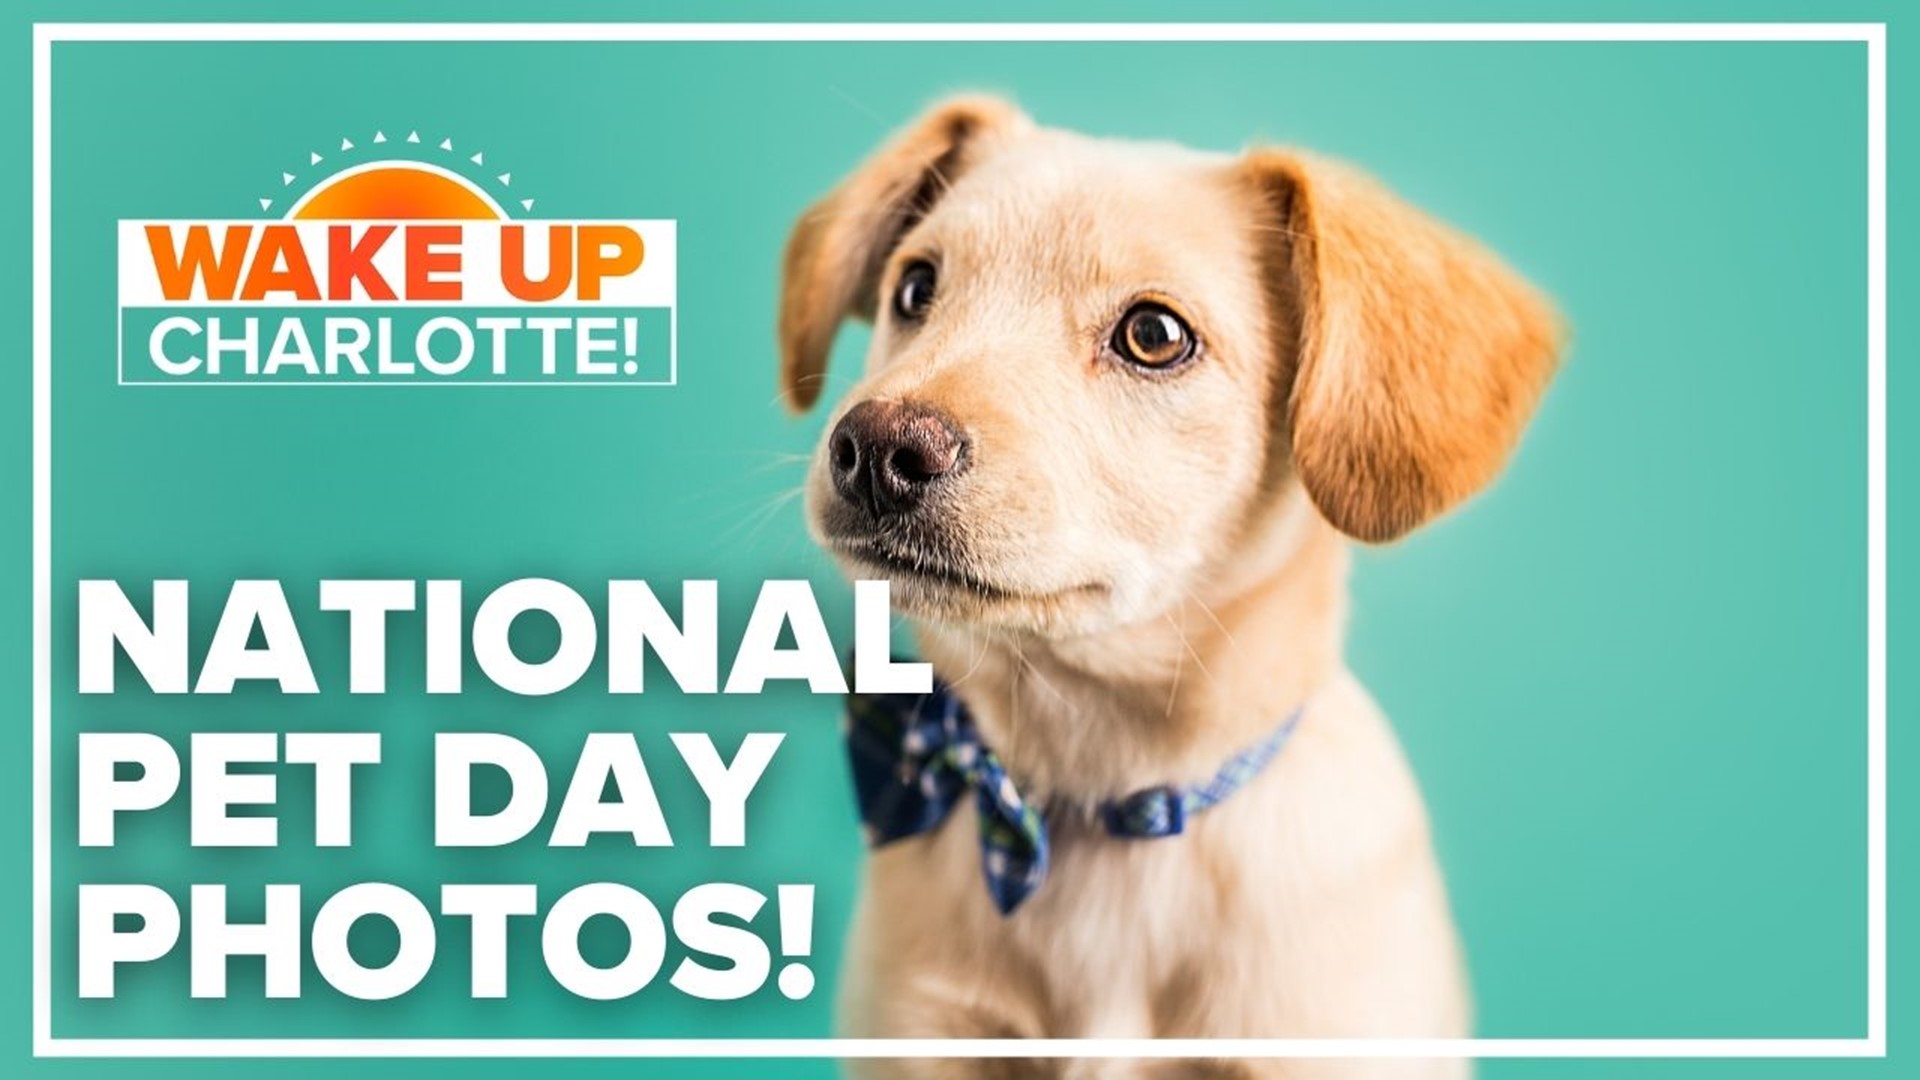 Monday, April 11, is National Pet Day! We're celebrating with our furry friends all day long.